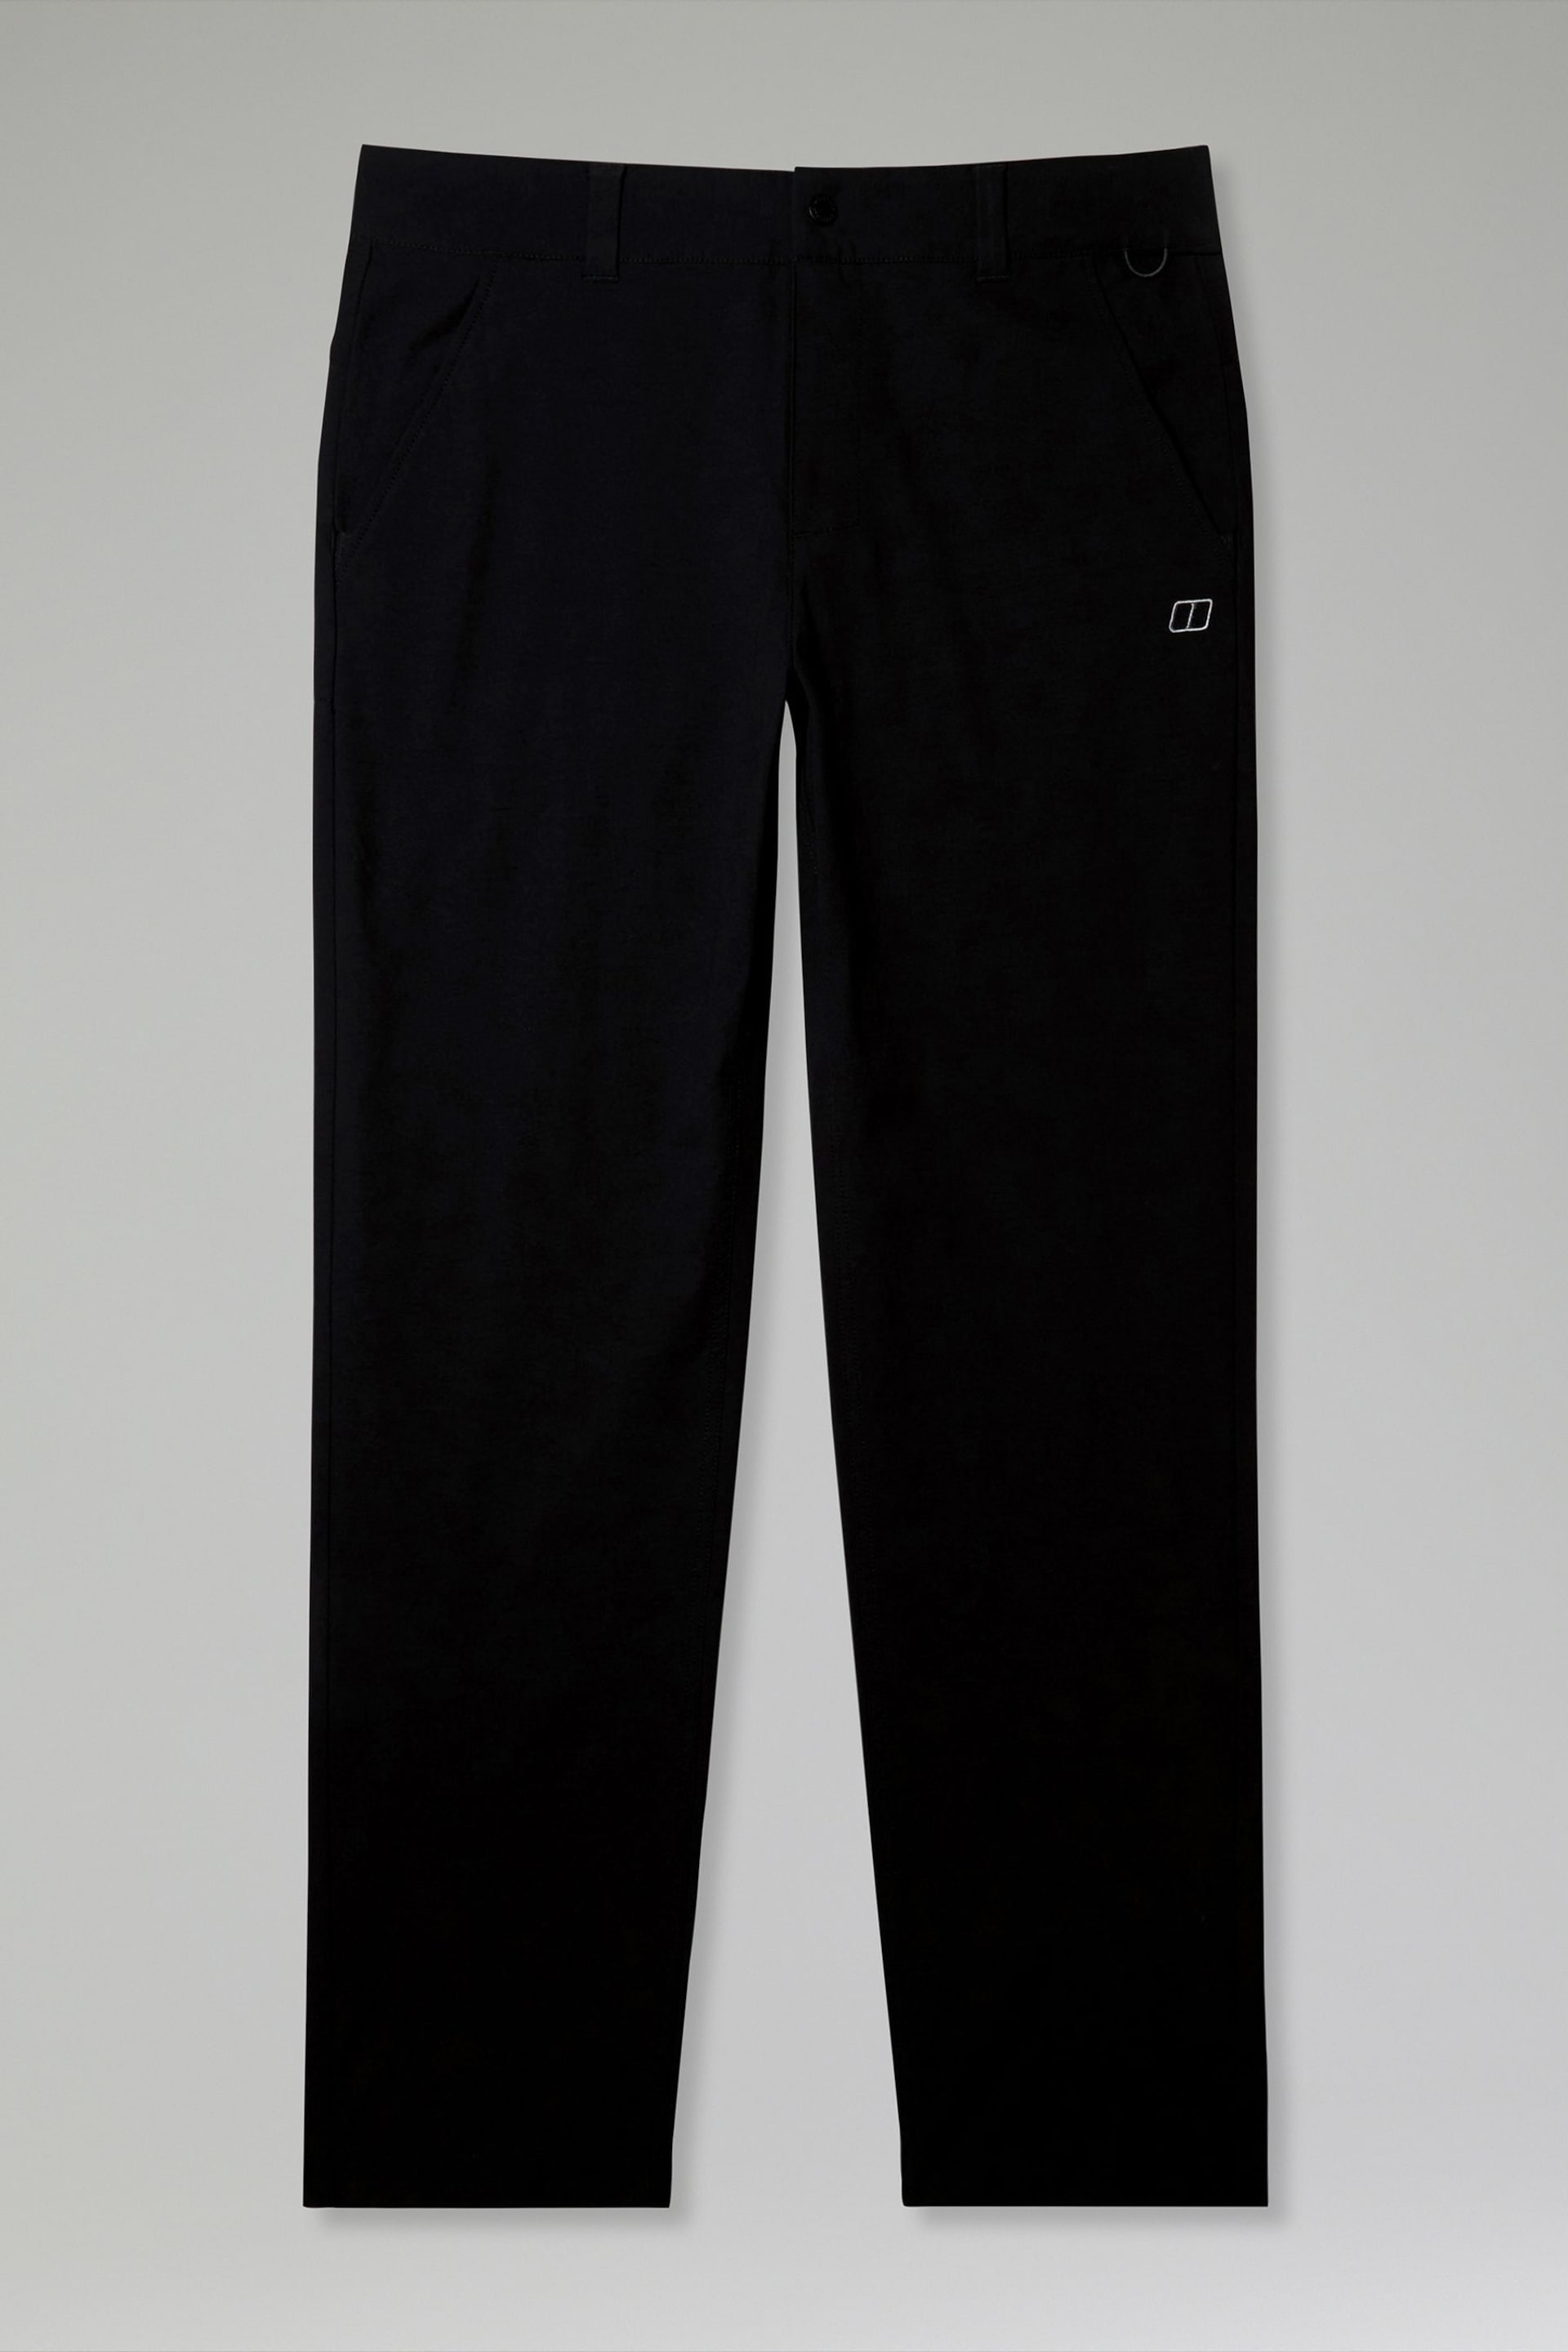 Berghaus Everyday Straight Trousers - Image 1 of 4